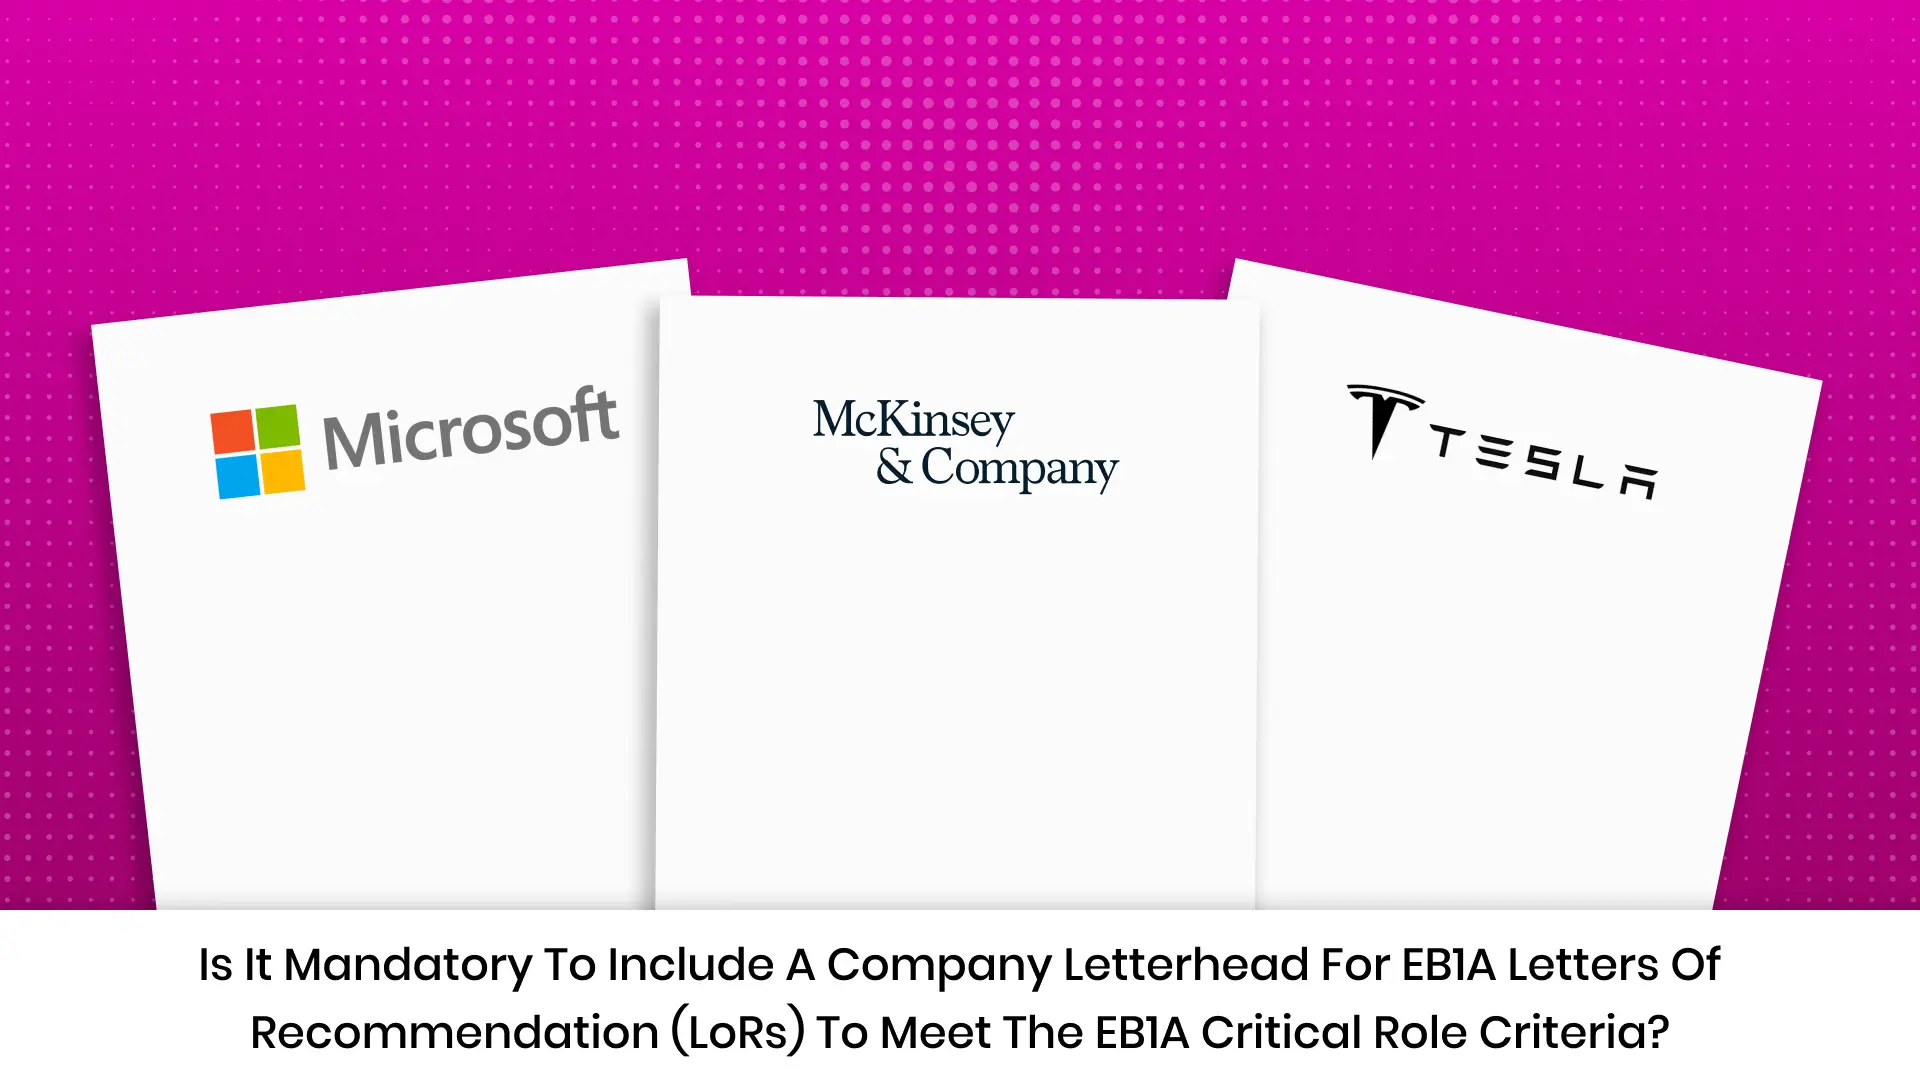 Required Company Letterhead for EB1A Letters of Recommendation to Fulfill Critical Role Criteria?